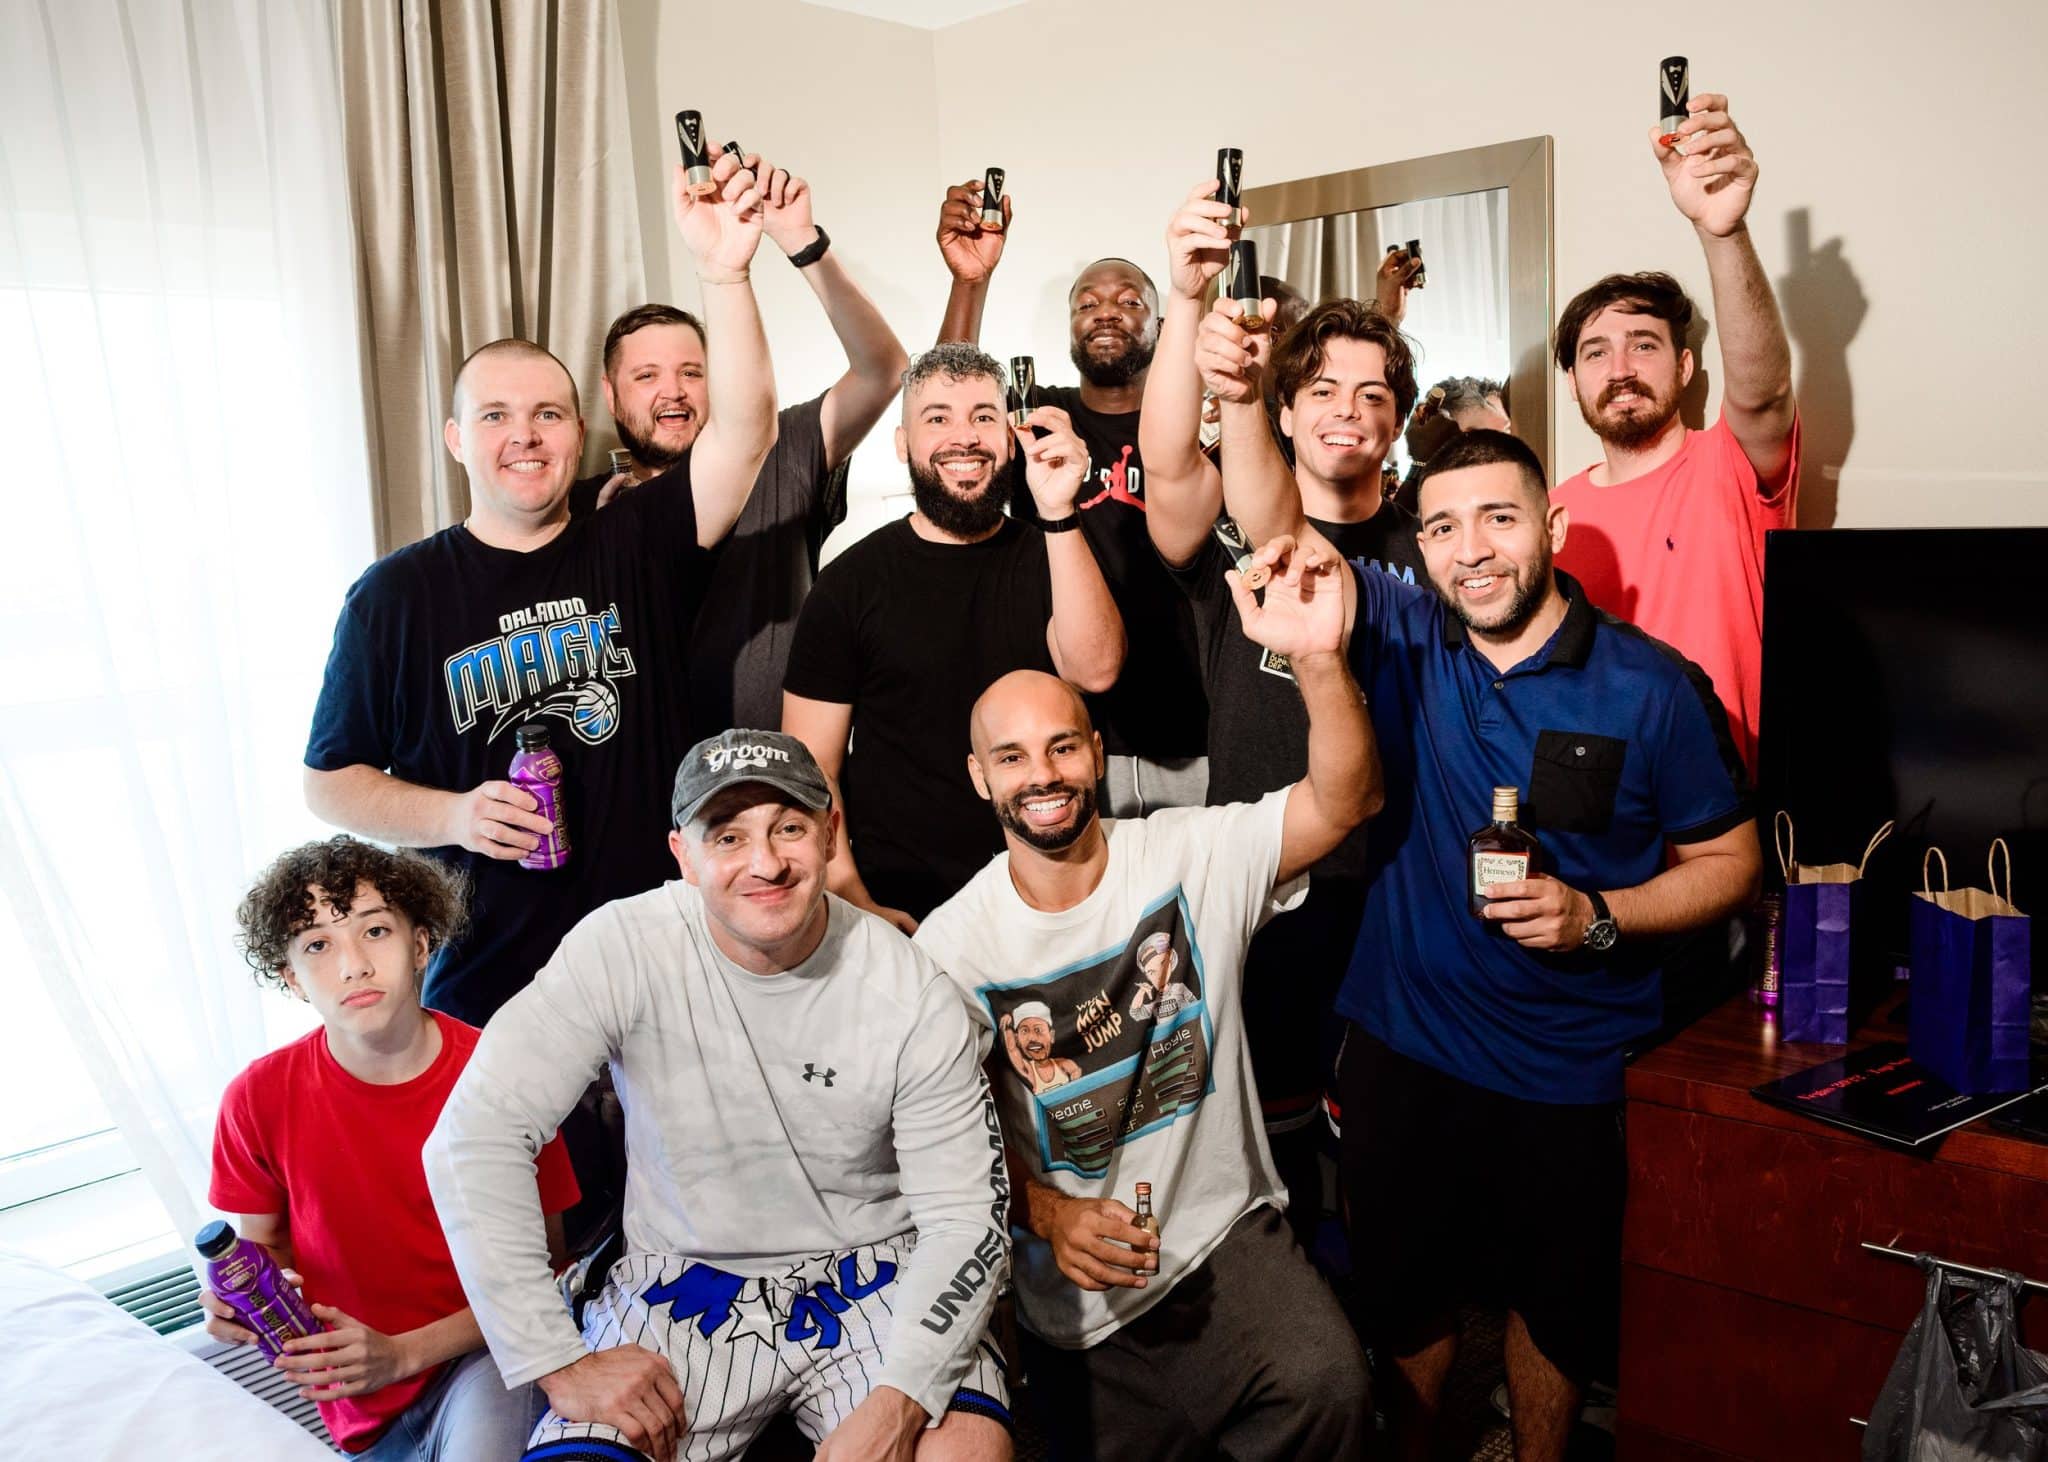 men sitting and standing in room holding shot glasses up smiling